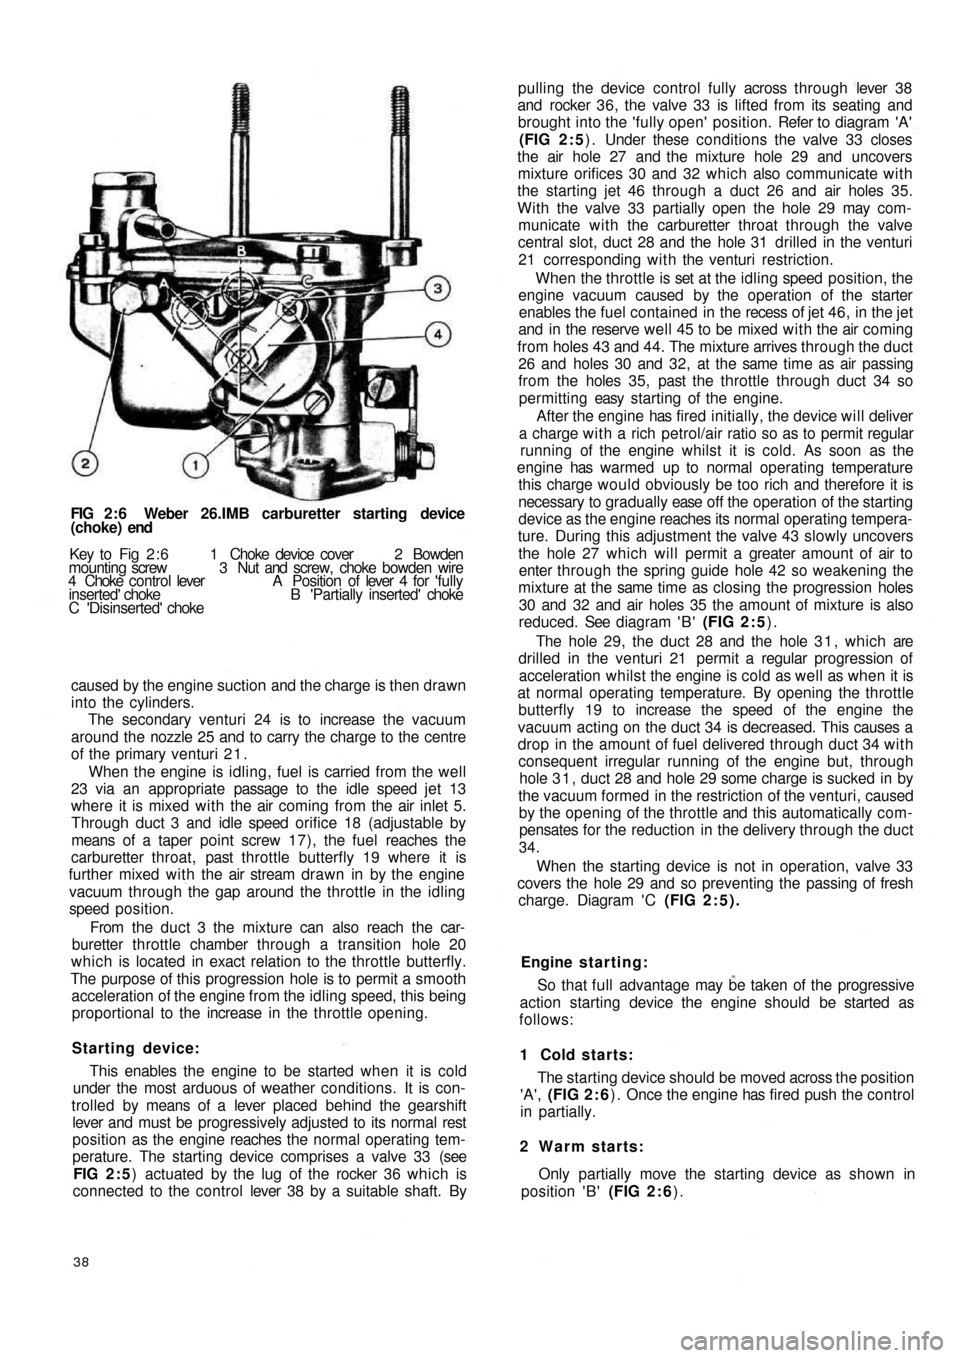 FIAT 500 1958 1.G Workshop Manual FIG 2 : 6  Weber 26.IMB carburetter starting device
(choke) end
Key  to   Fig   2 : 6   1   Choke  device  cover   2  Bowden
mounting screw  3  Nut and screw, choke bowden wire
4  Choke  control lever